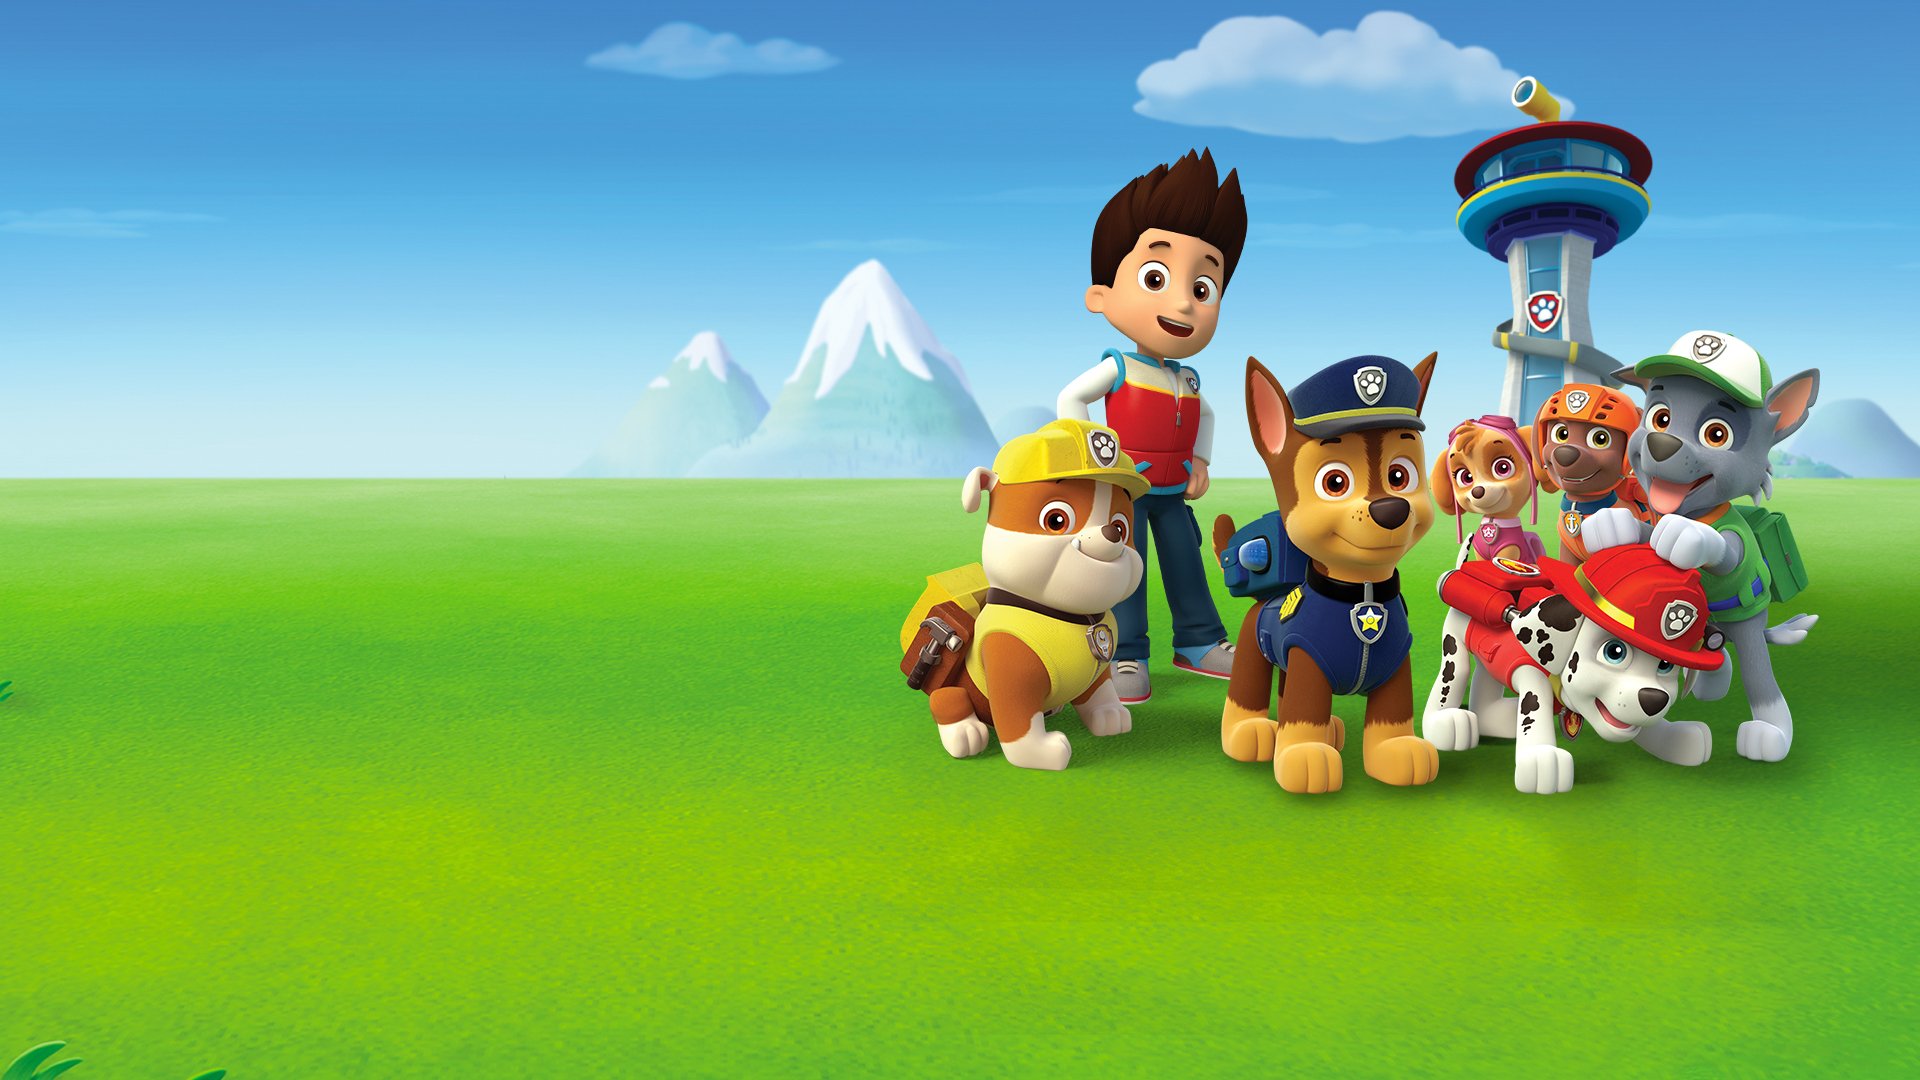 All Paw Patrol Wallpapers - Wallpaper Cave